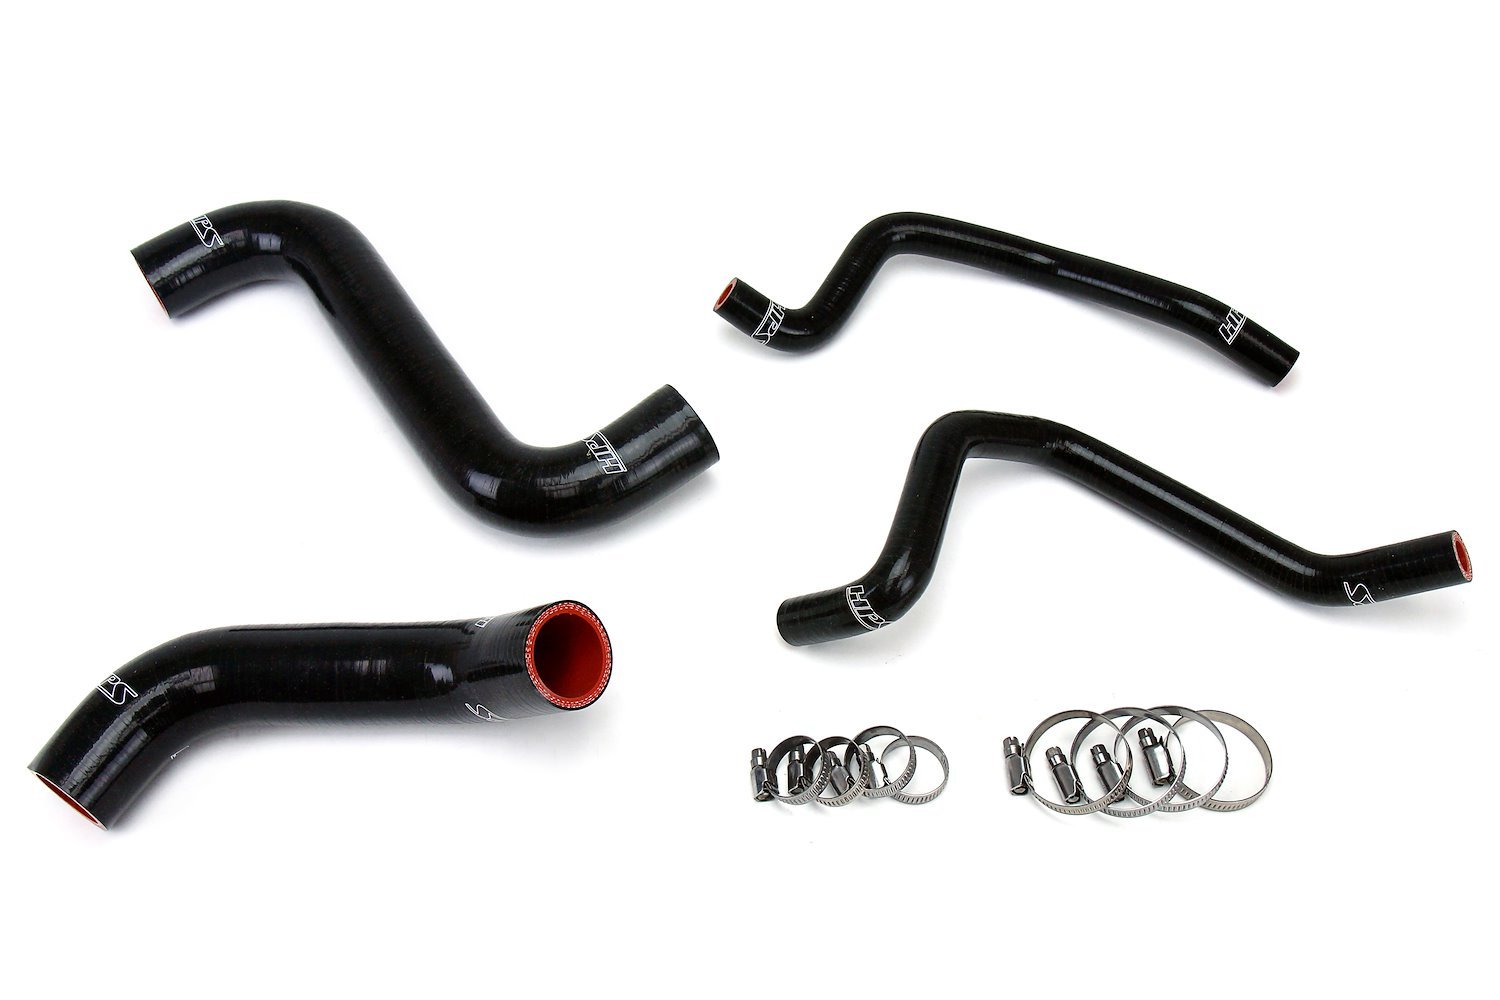 57-1810-BLK Radiator and Heater Hose Kit, 3-Ply Reinforced Silicone, Replaces Rubber Radiator & Heater Coolant Hoses